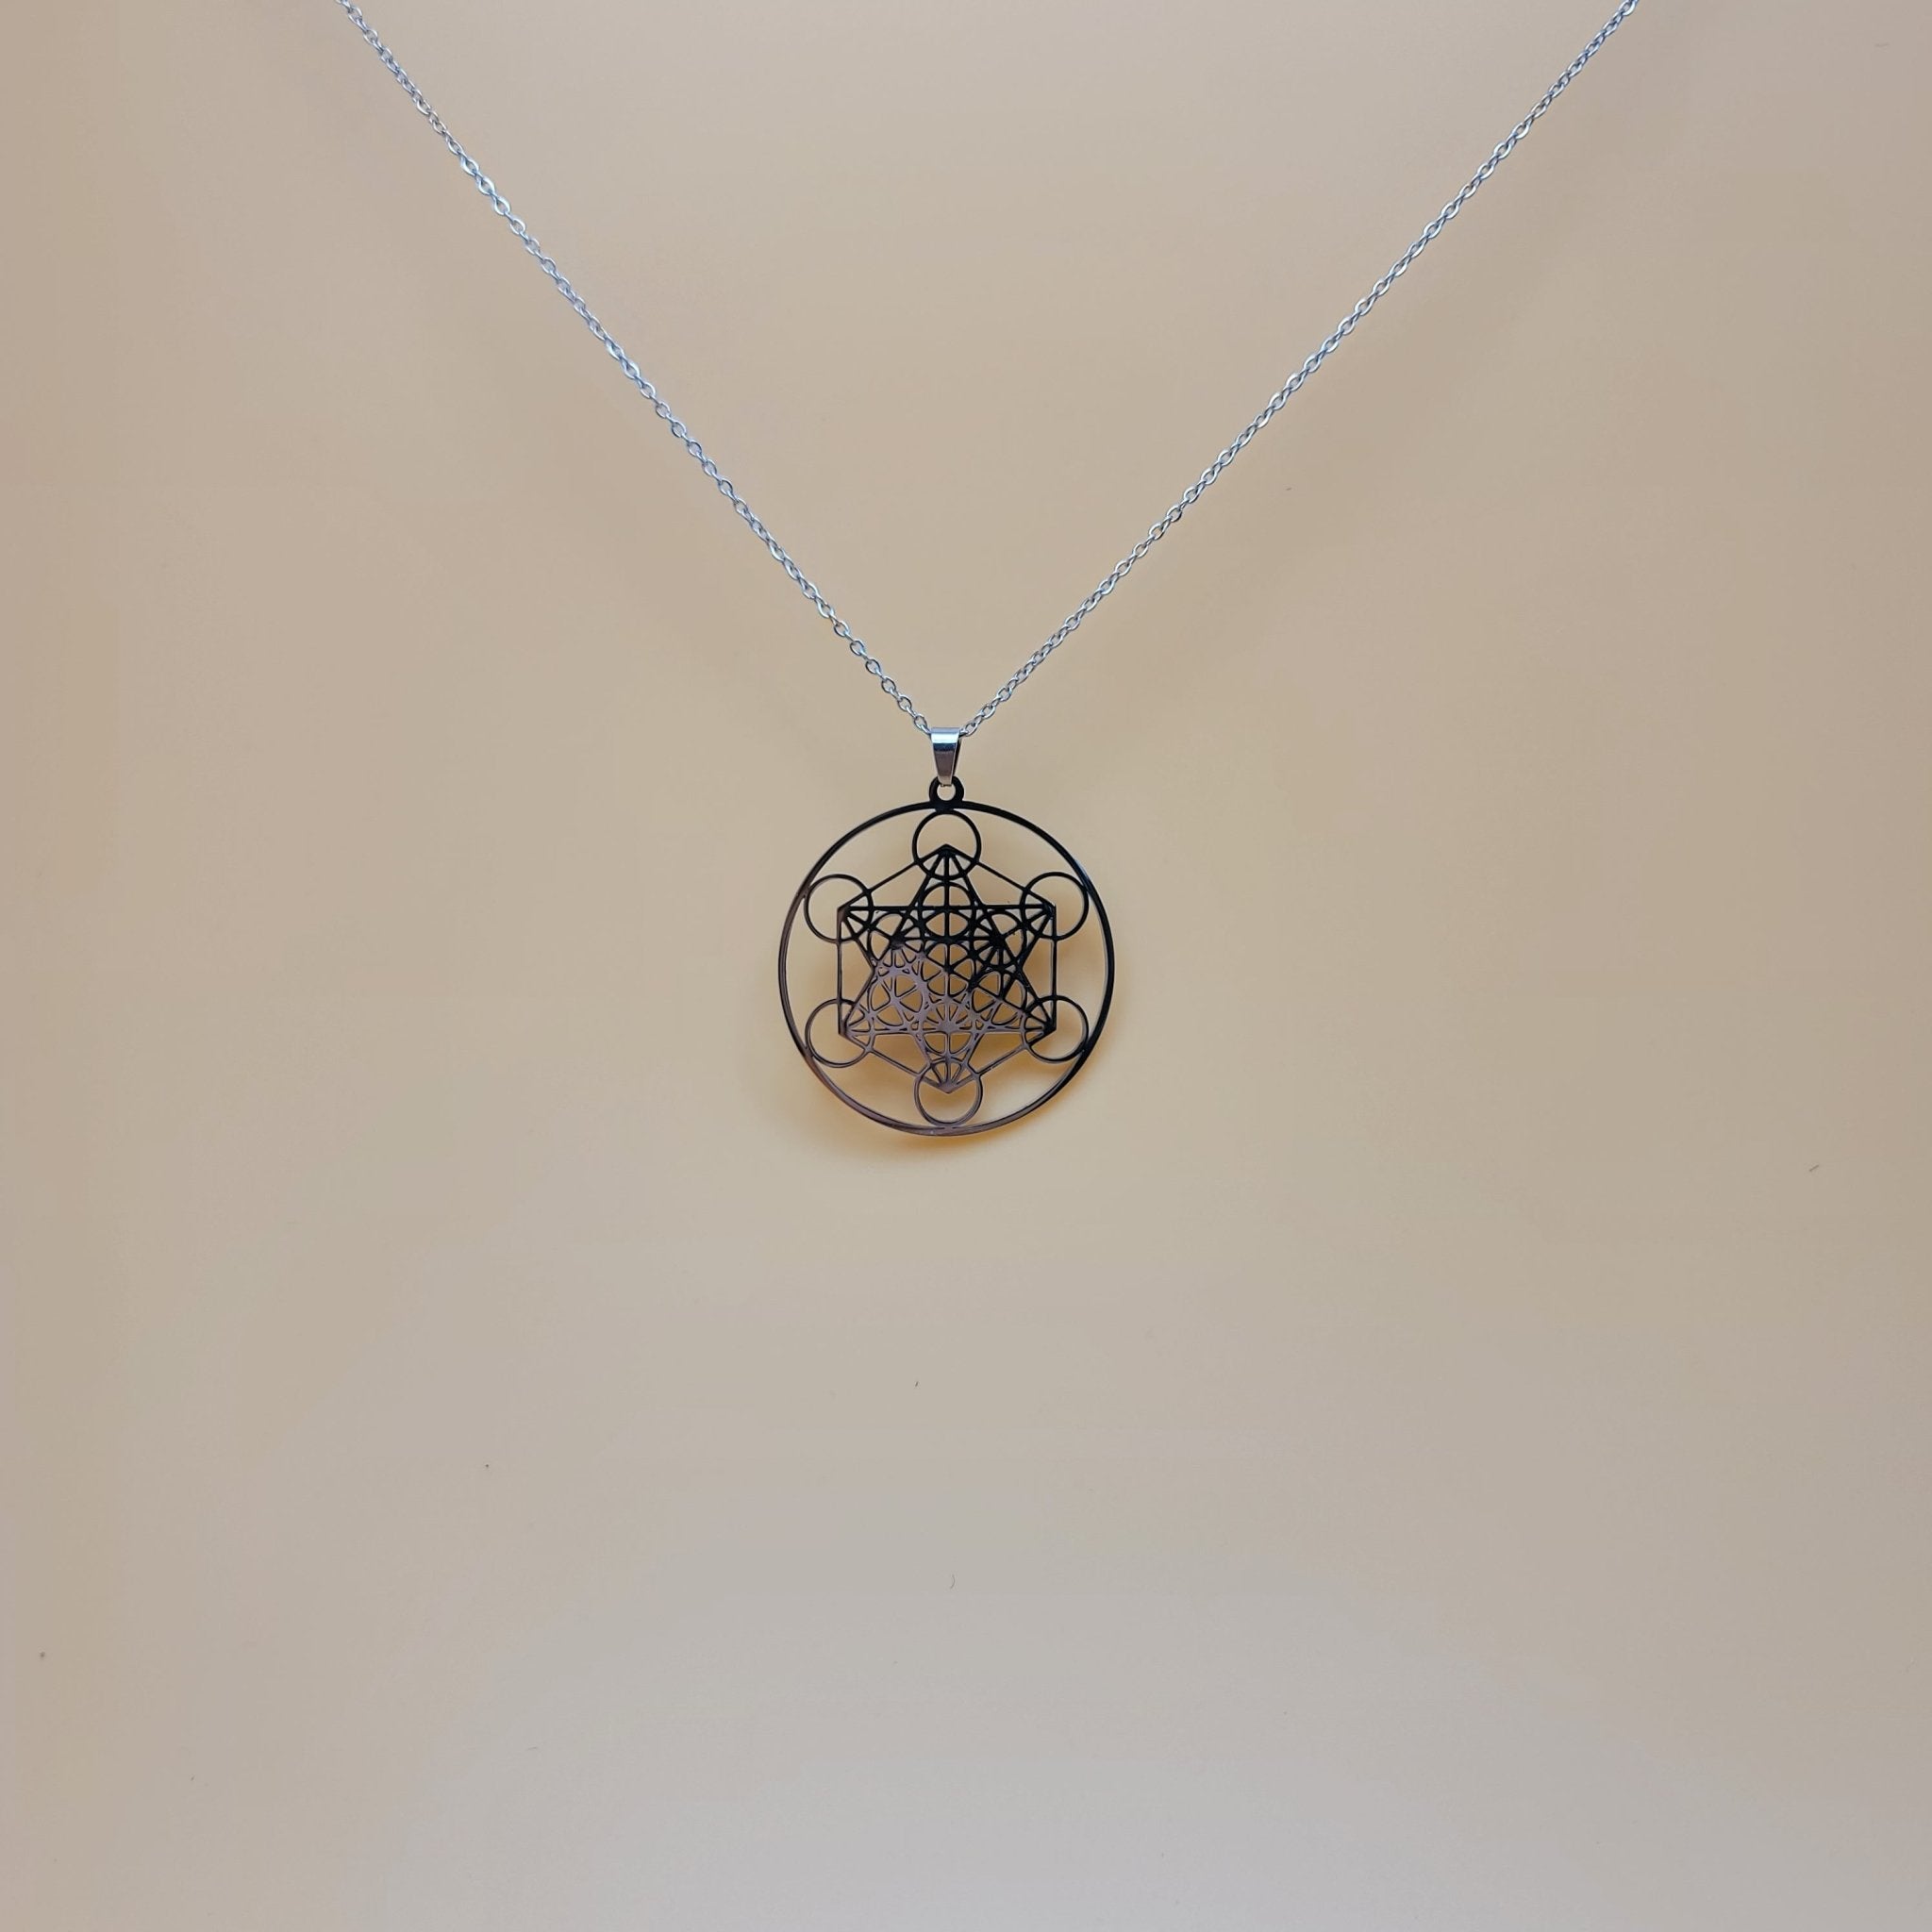 Sacred Geometry Metatron's Cube Necklace | Stainless Steel - Spiral Circle